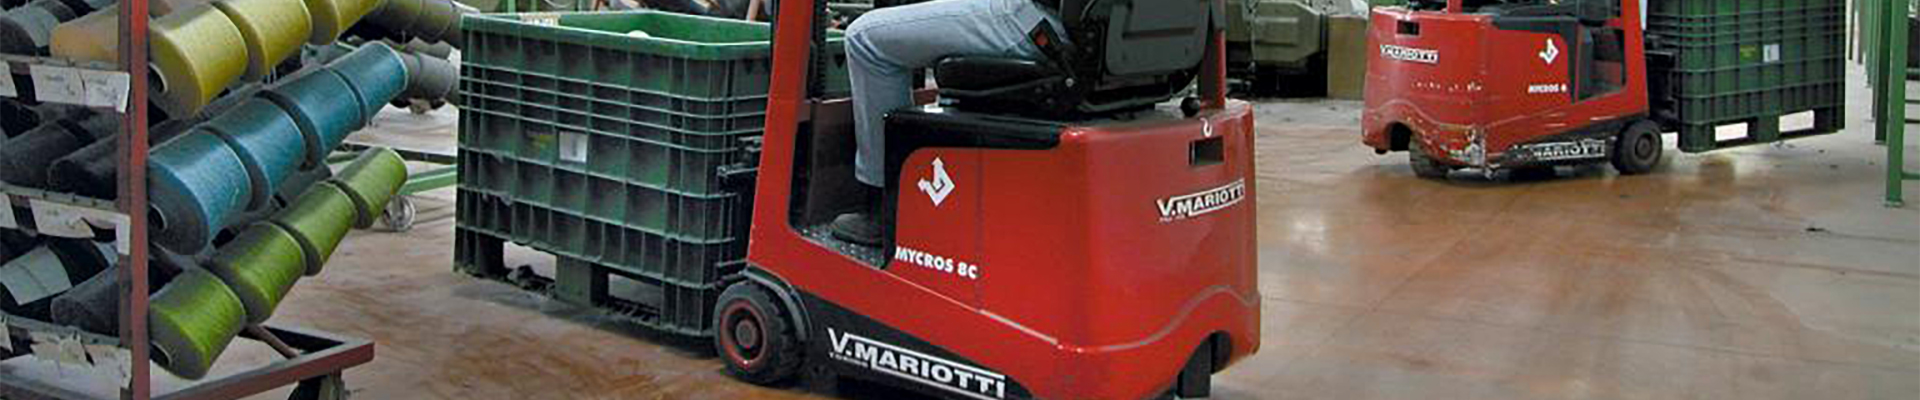 Mariotti forklifts in a warehouse